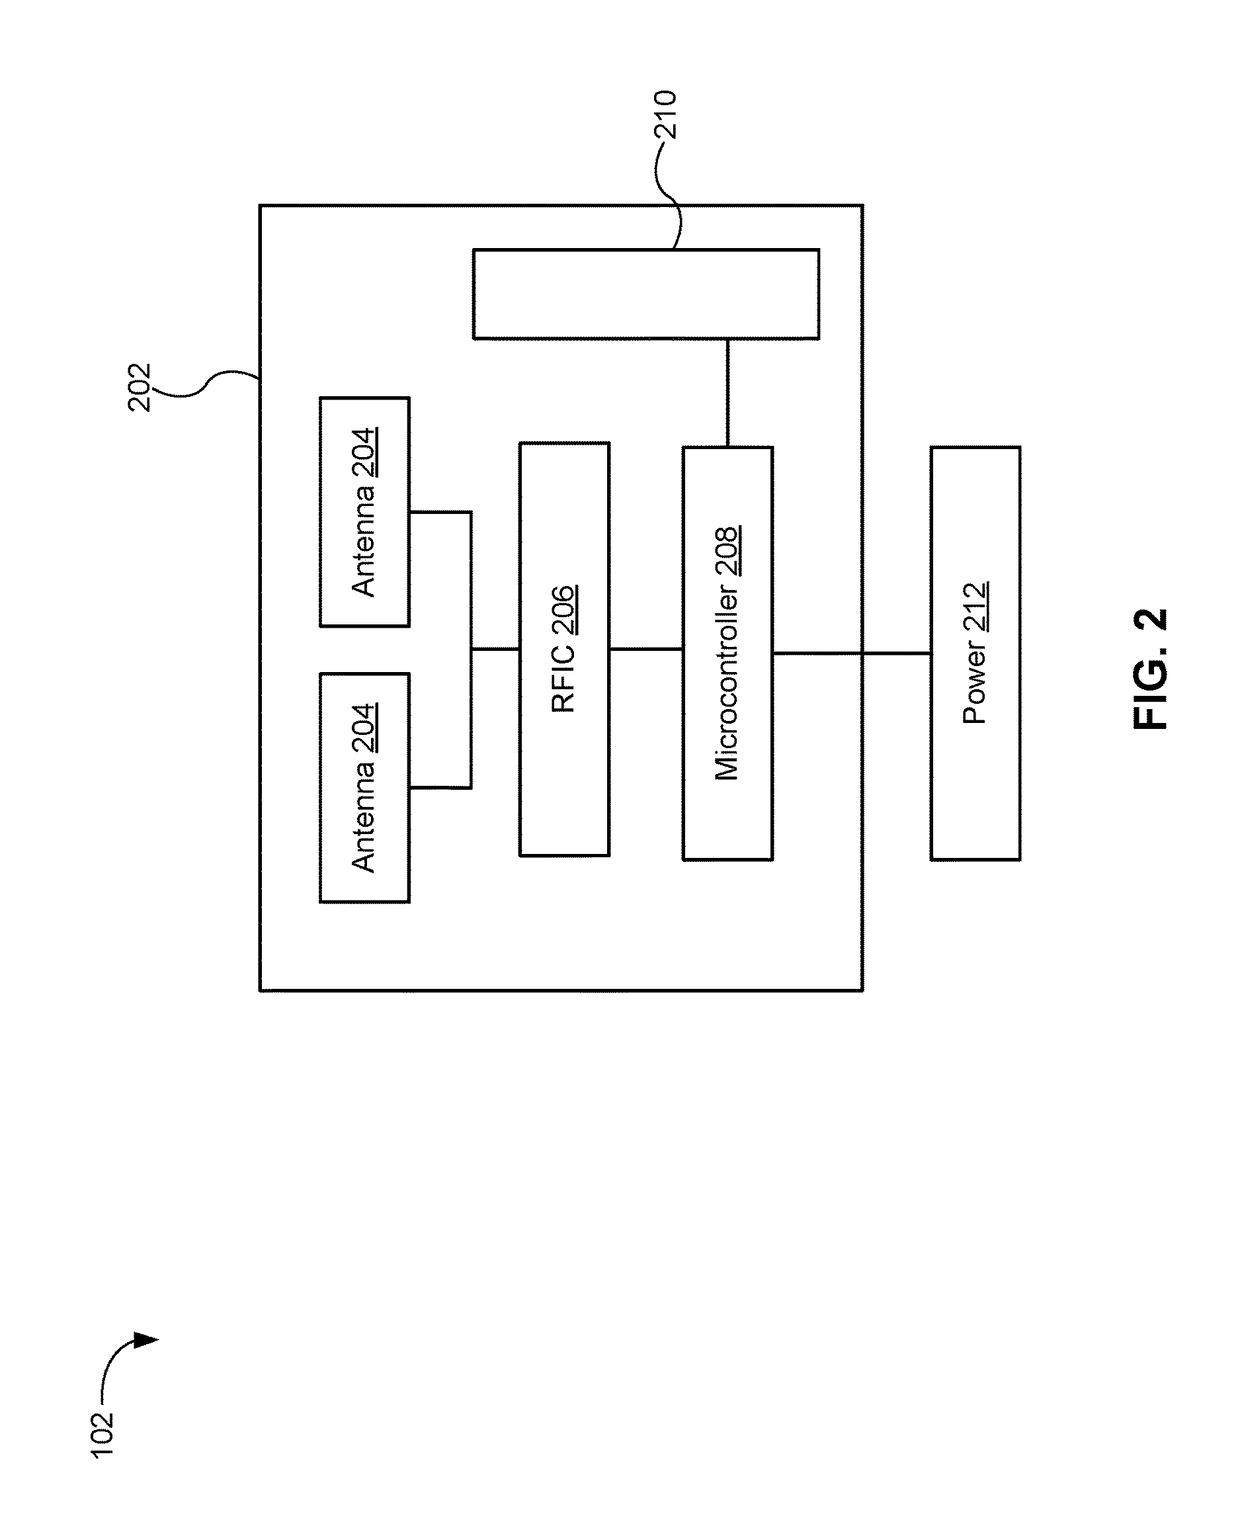 Enhanced receiver for wireless power transmission